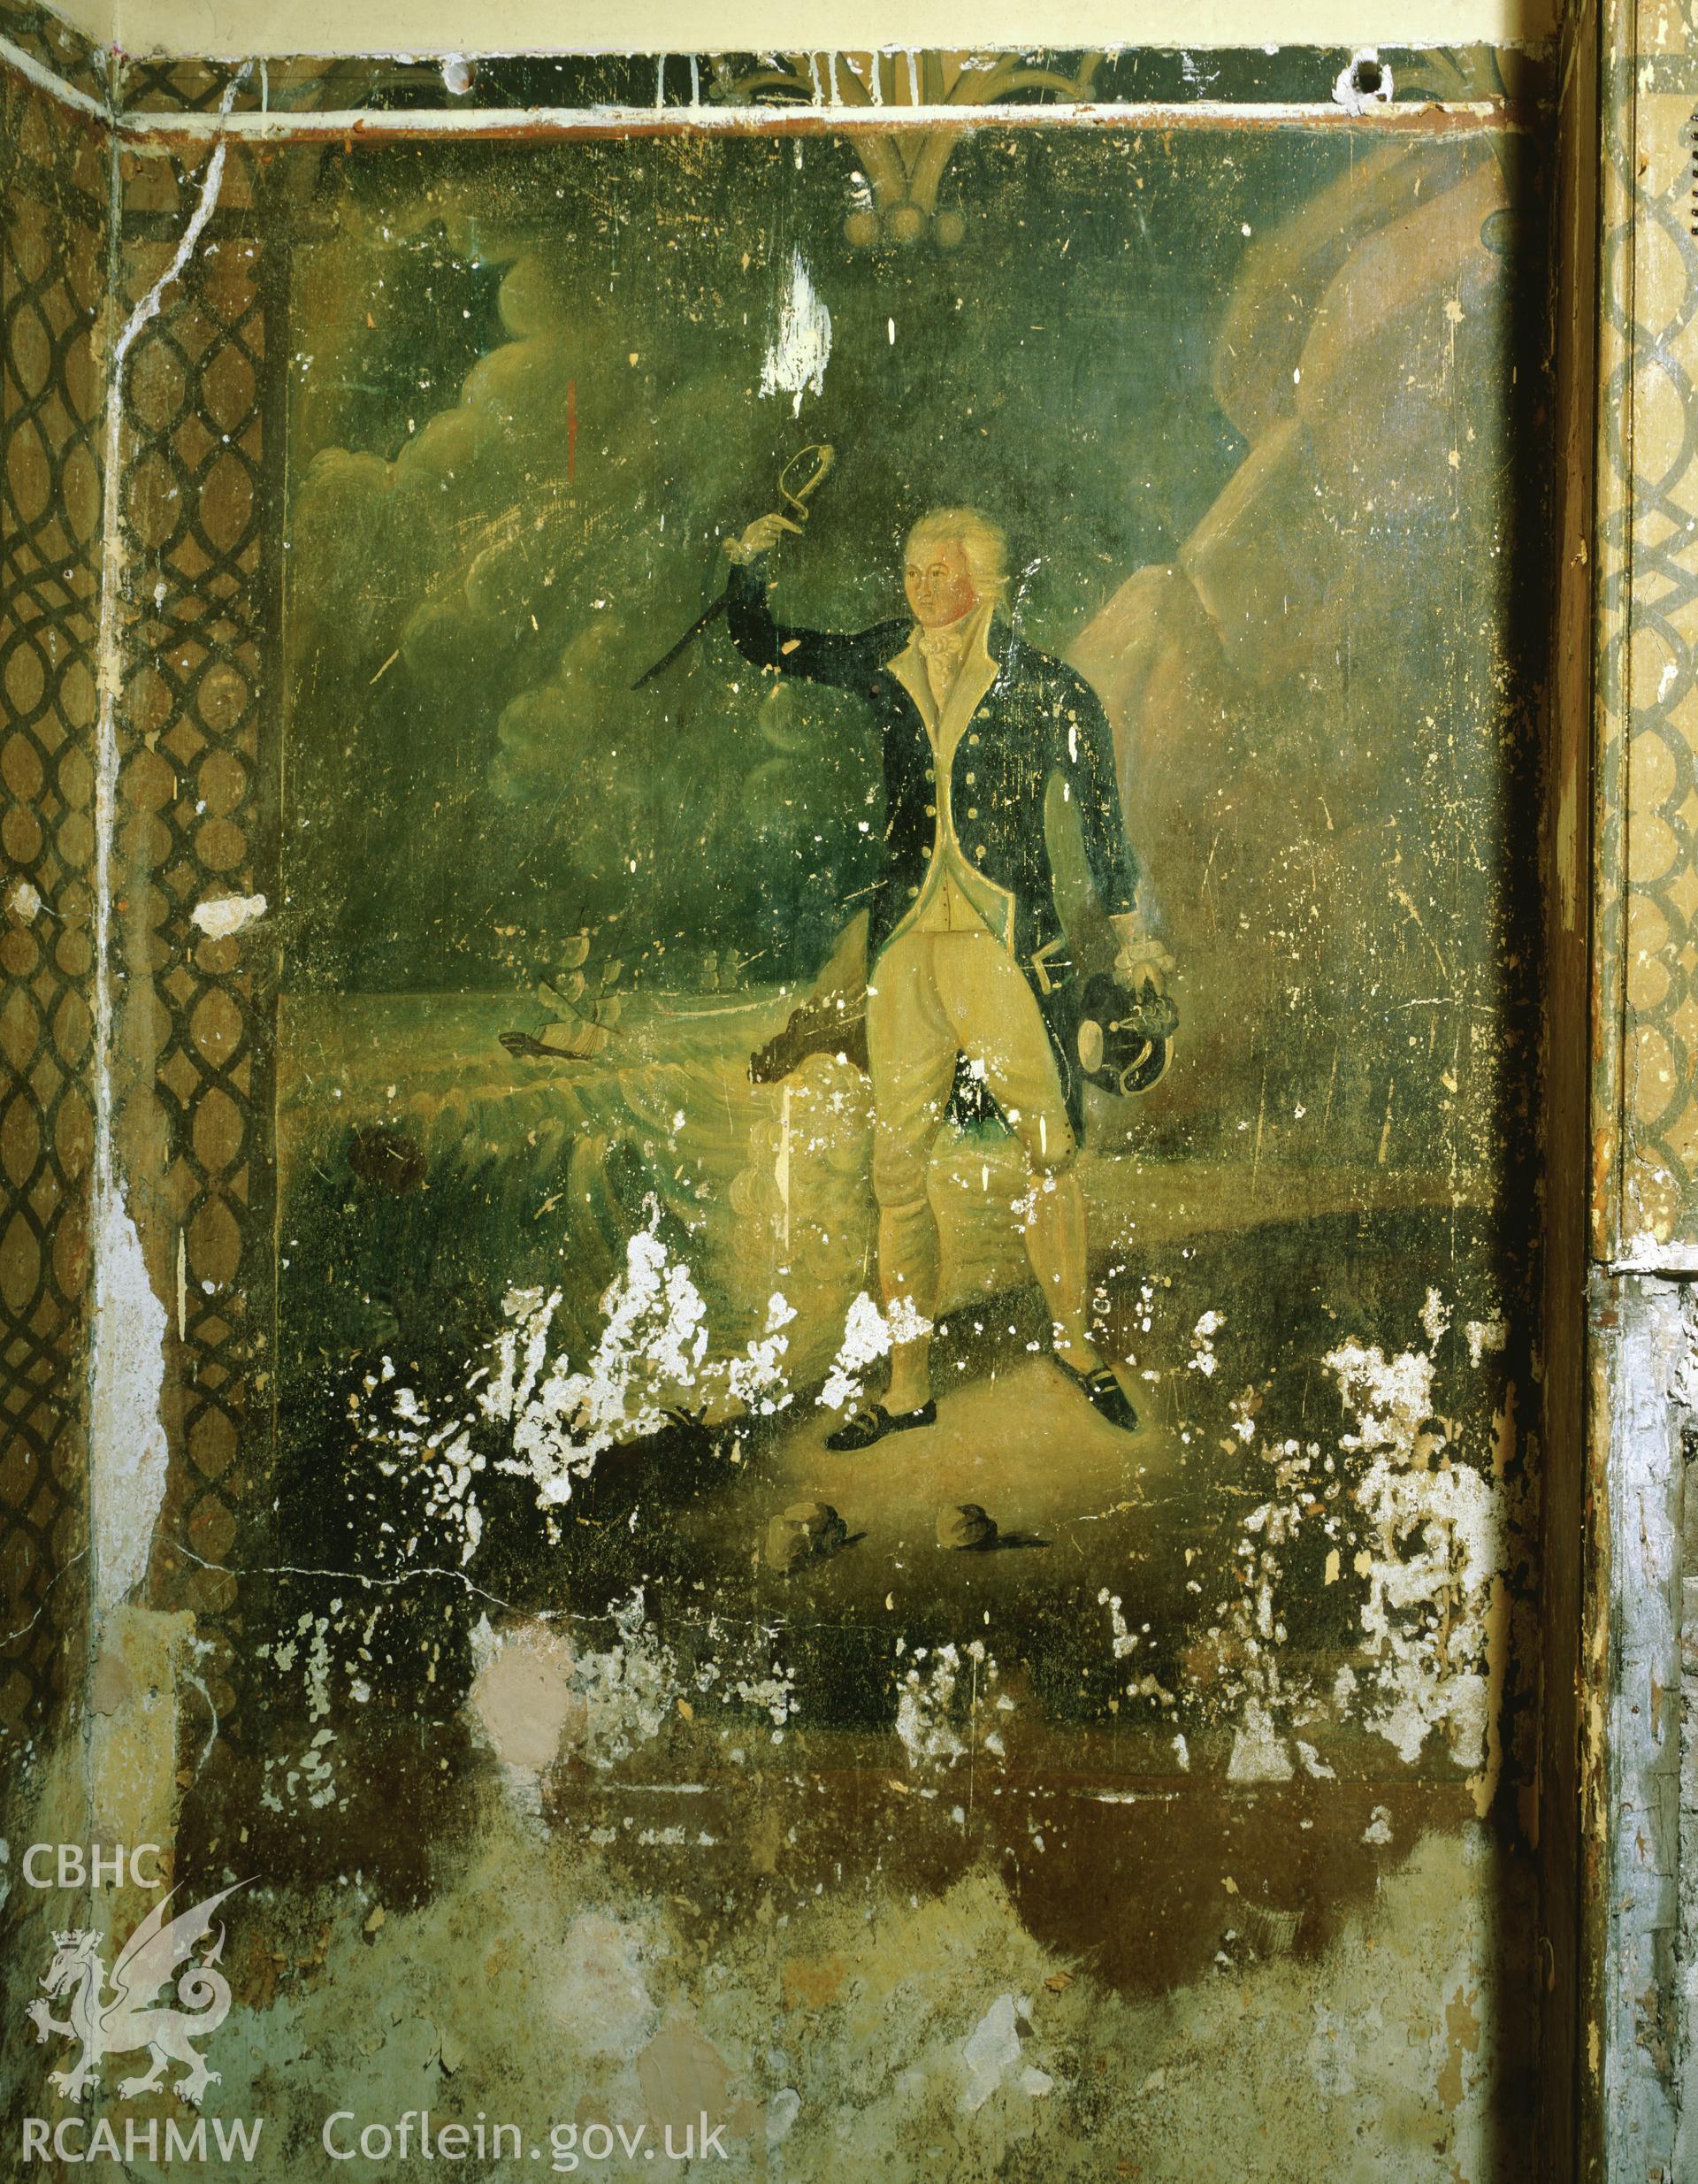 RCAHMW colour transparency showing naval officer in a coastal landscape wallpainting, at Elwy Bank, St Asaph, photographed by Iain Wright, November 2003.